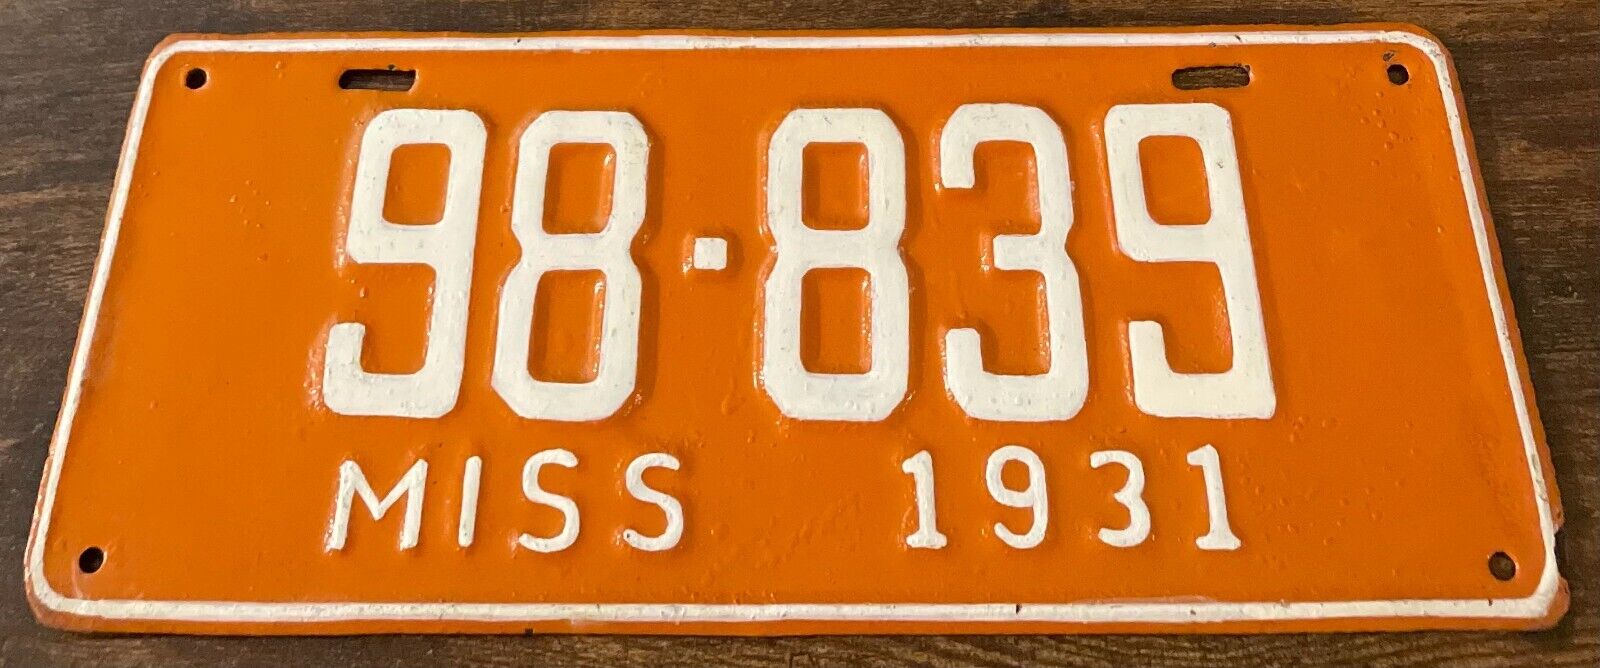 Vintage 1931 Mississippi License Plate 98-839 Ford Model A REPAINT